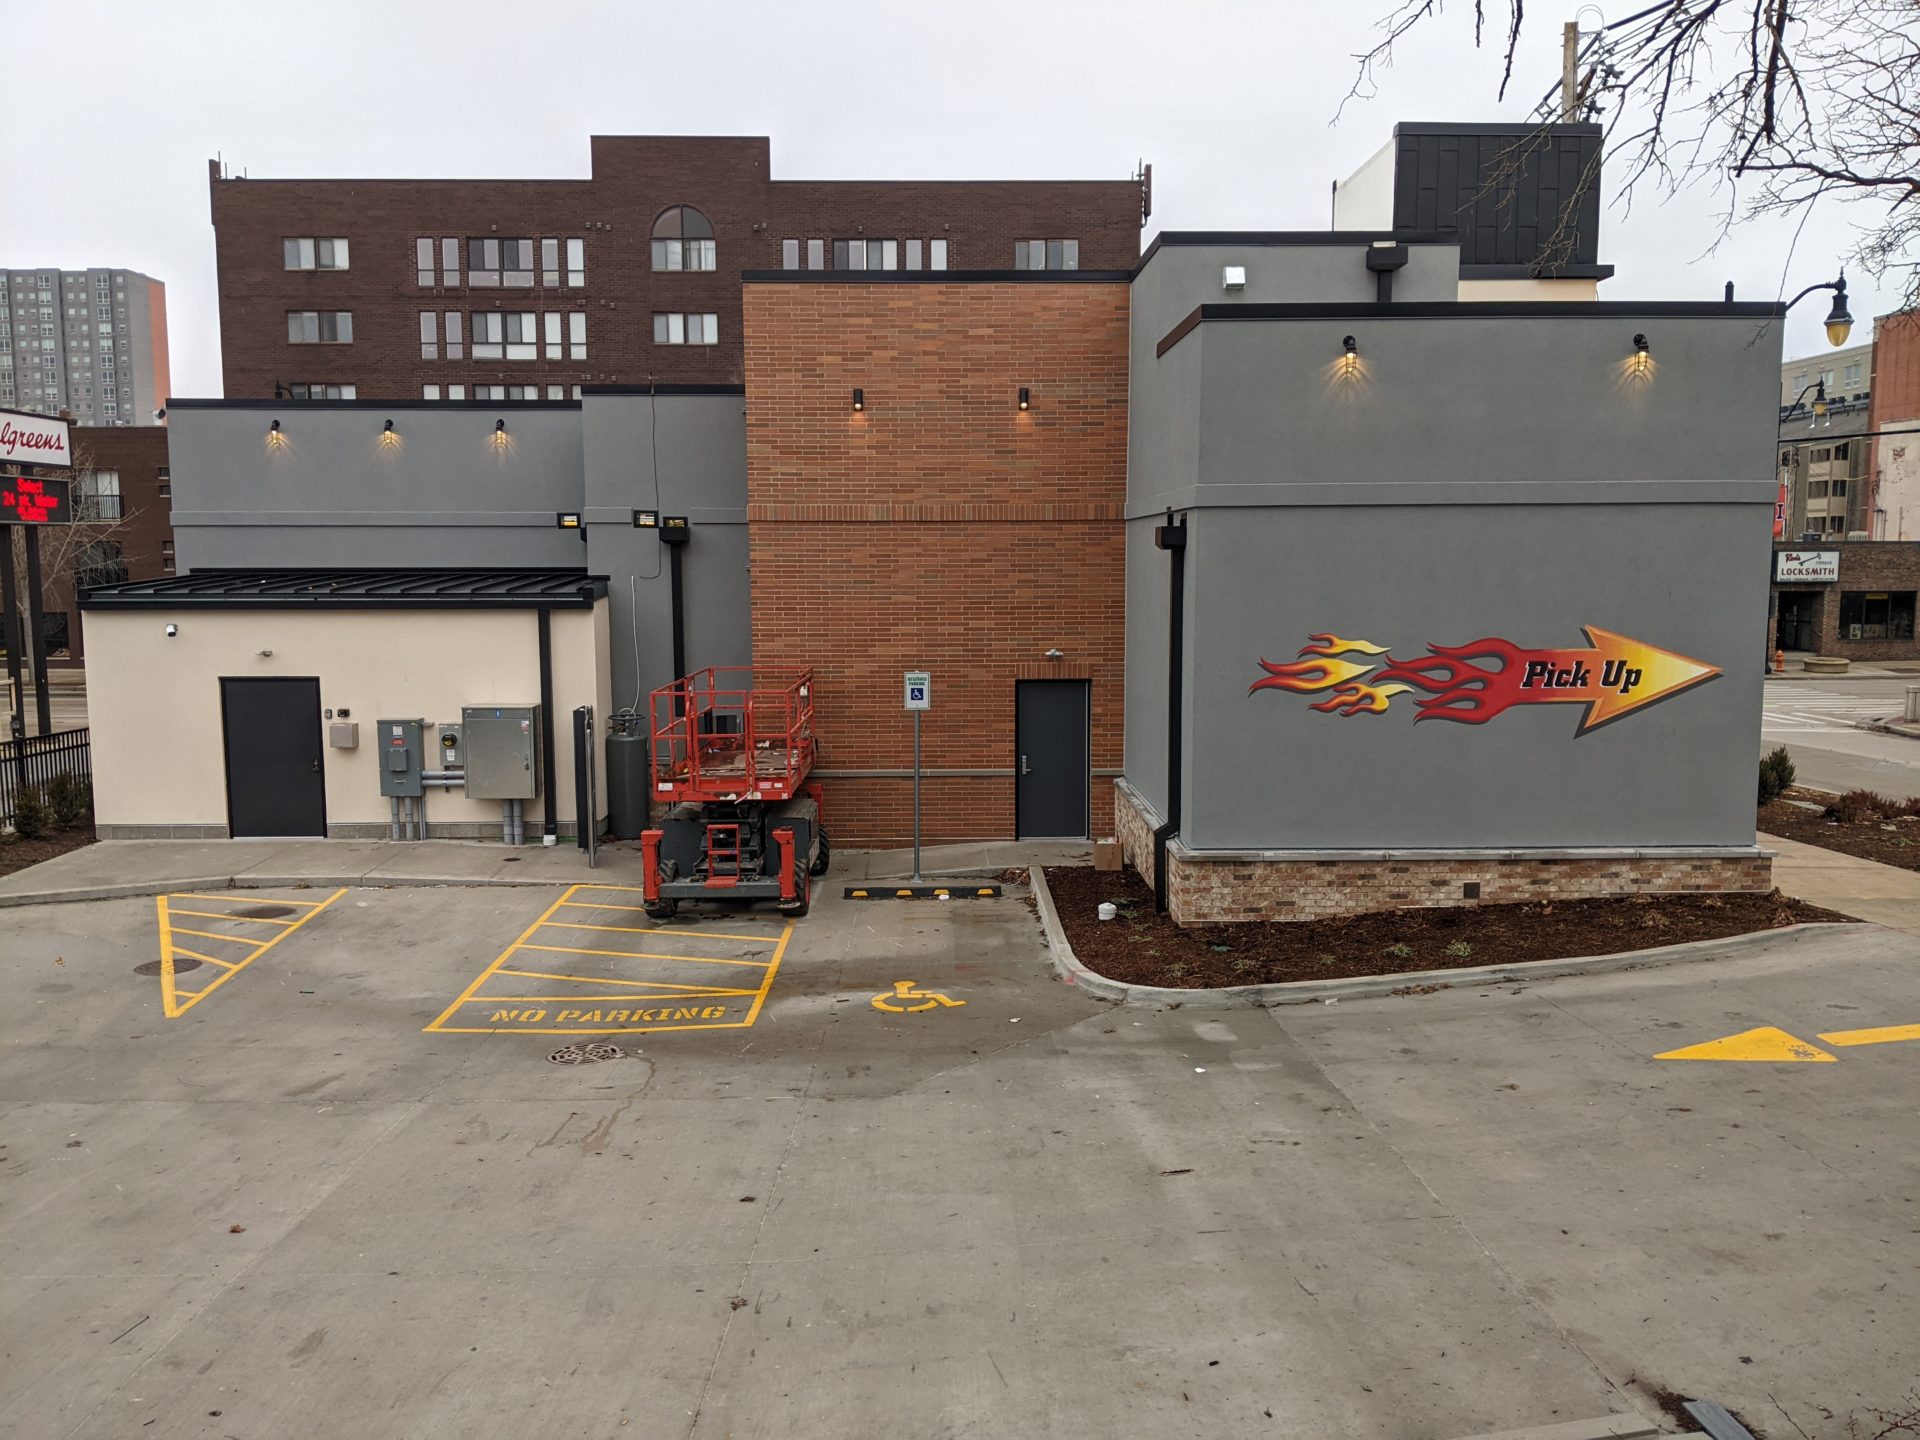 The back side of a building that has sections of gray as well as a section of brick. There are a few parking space in the adjacent lot. On one gray wall is an arrow painted to look like flames that says Pick Up in black lettering.